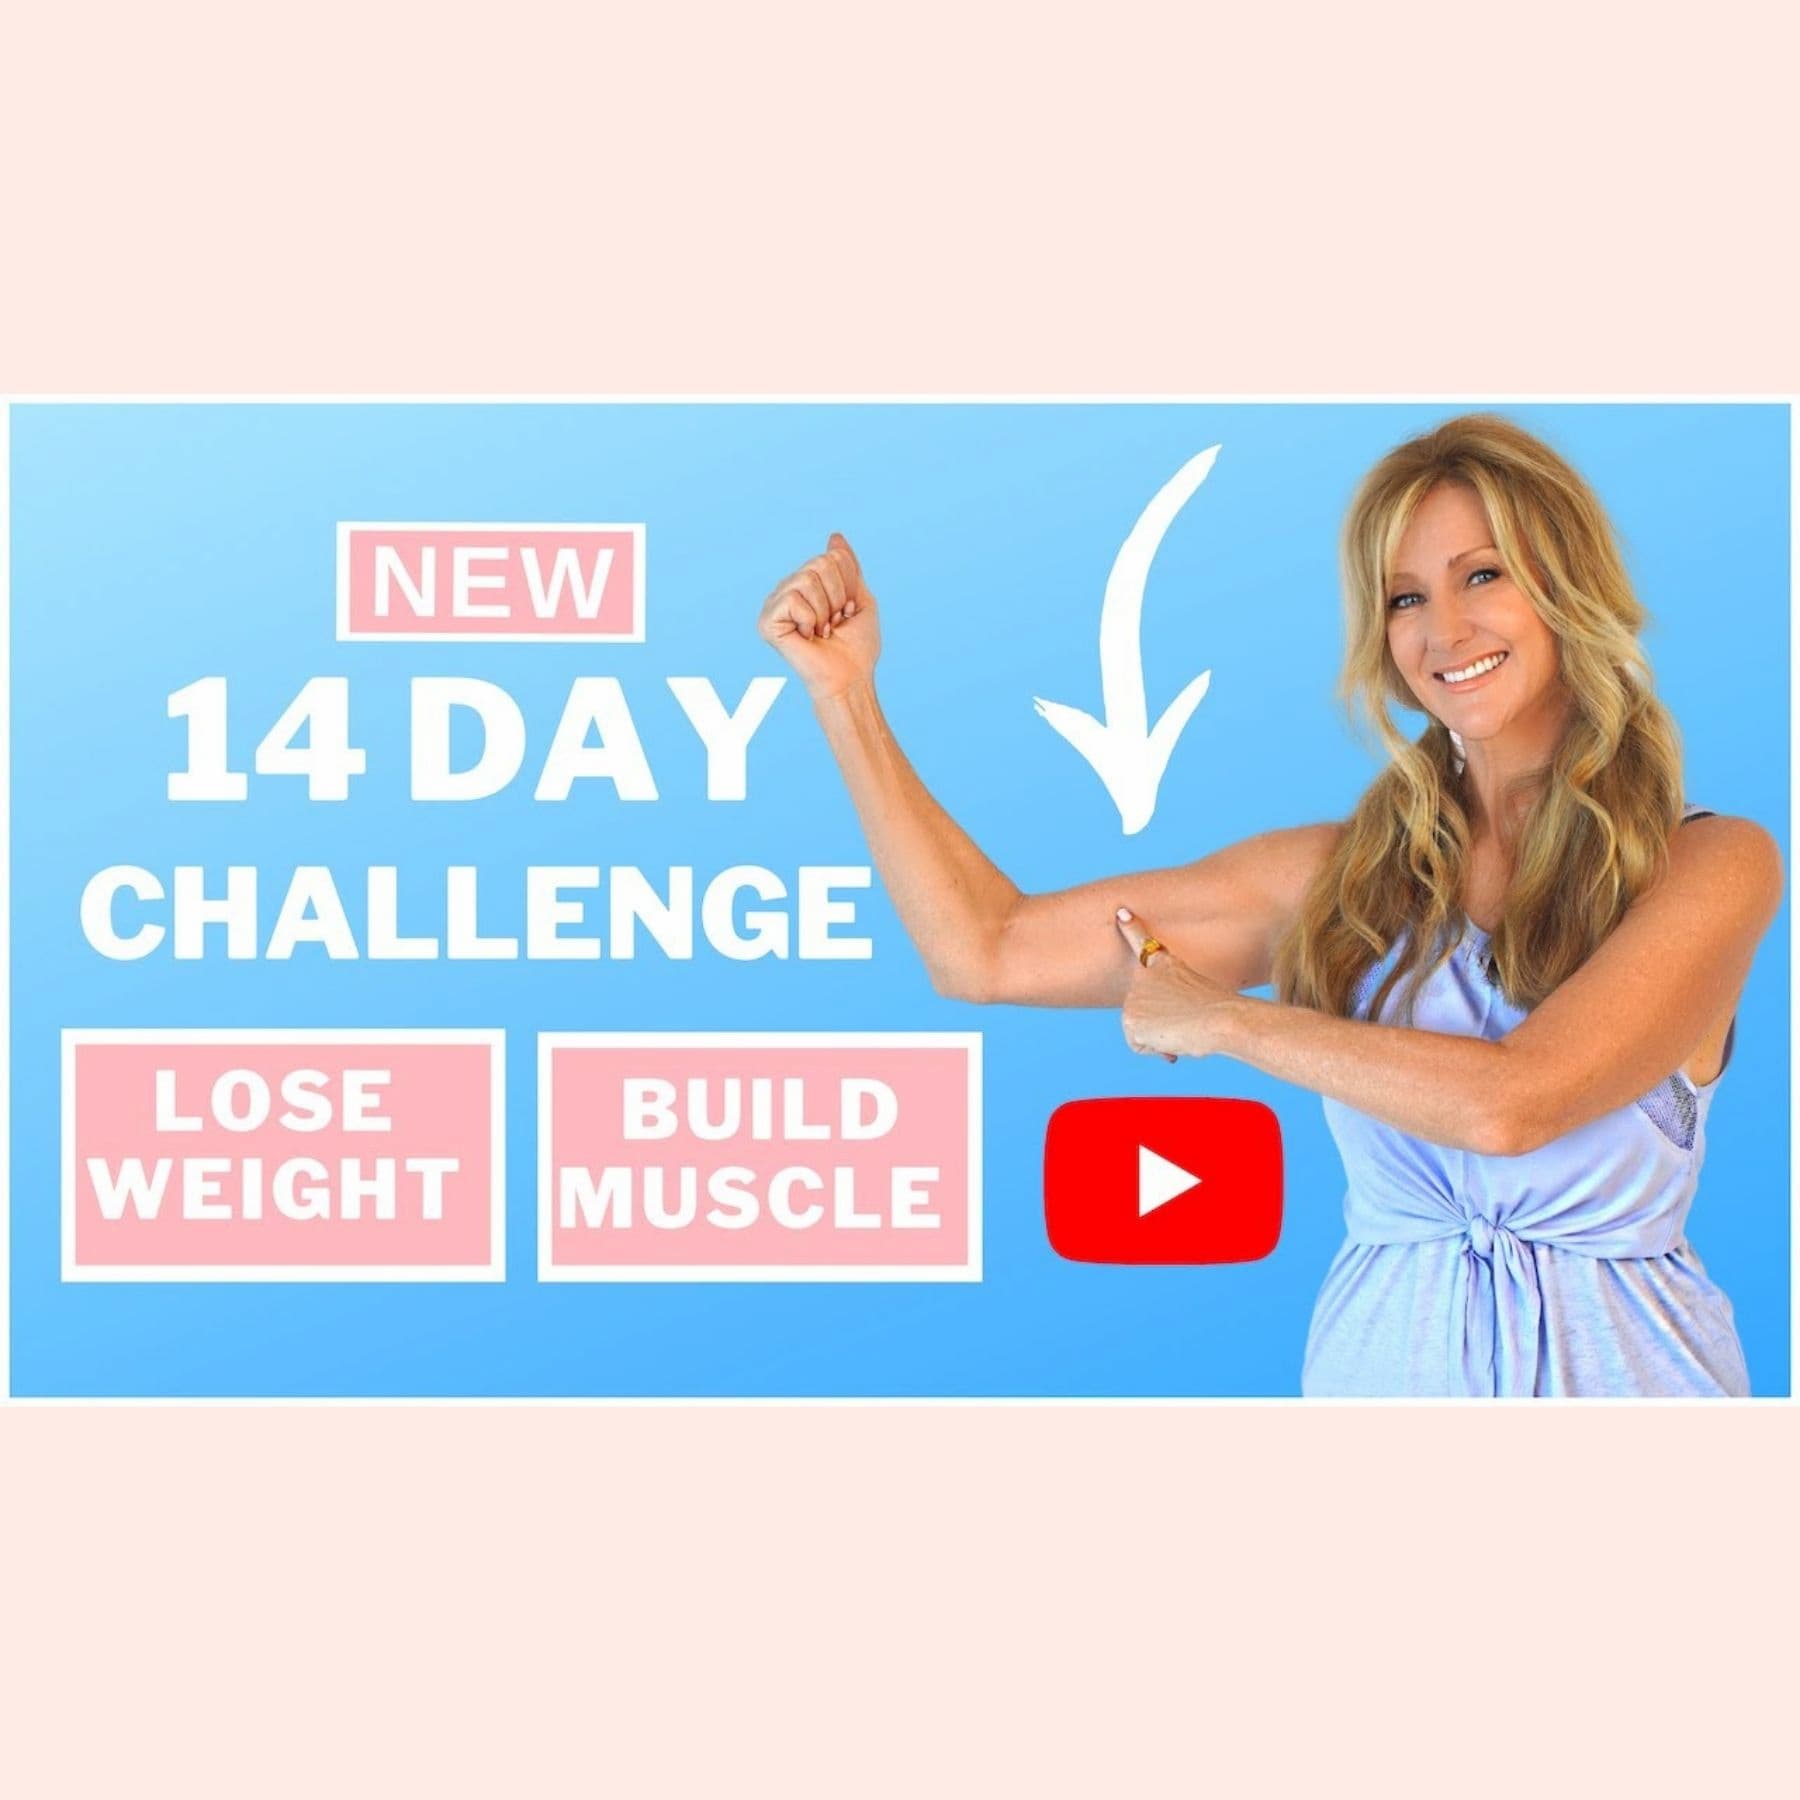 Fabulous50s 14 Day Workout Challenge Lose Weight & Build